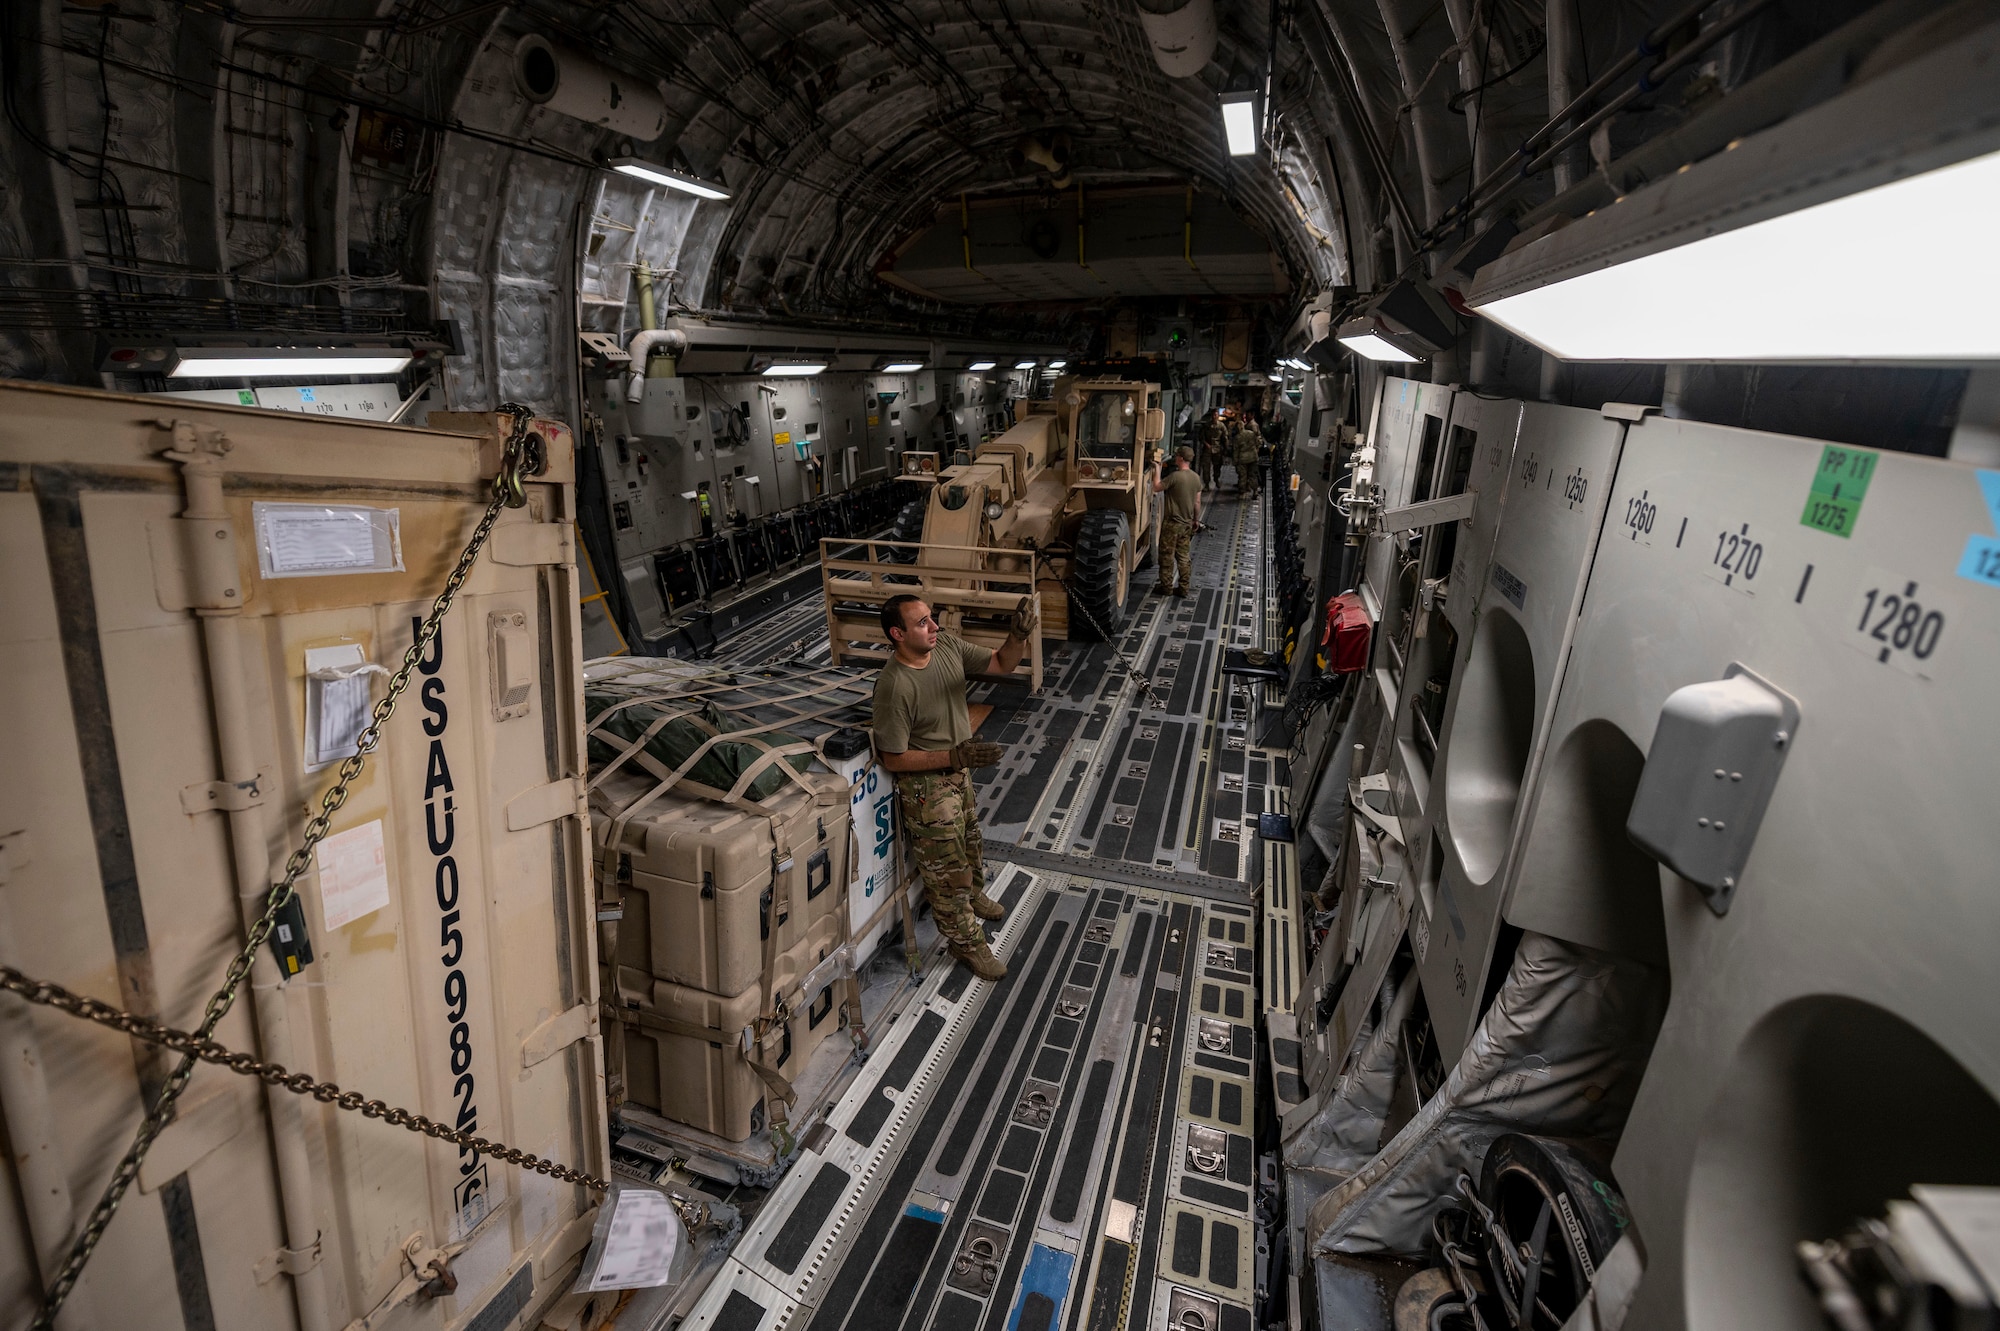 A U.S. Air Force C-17 Globemaster III aircraft loadmaster, assigned to the 816th Expeditionary Airlift Squadron, ensures the cargo is secured properly during a mission in support of Combined Joint Task Force - Operation Inherent Resolve in the U.S. Central Command area of responsibility, Aug. 14, 2021. U.S. Air Force photo illustration by Senior Airman Taylor Crul)